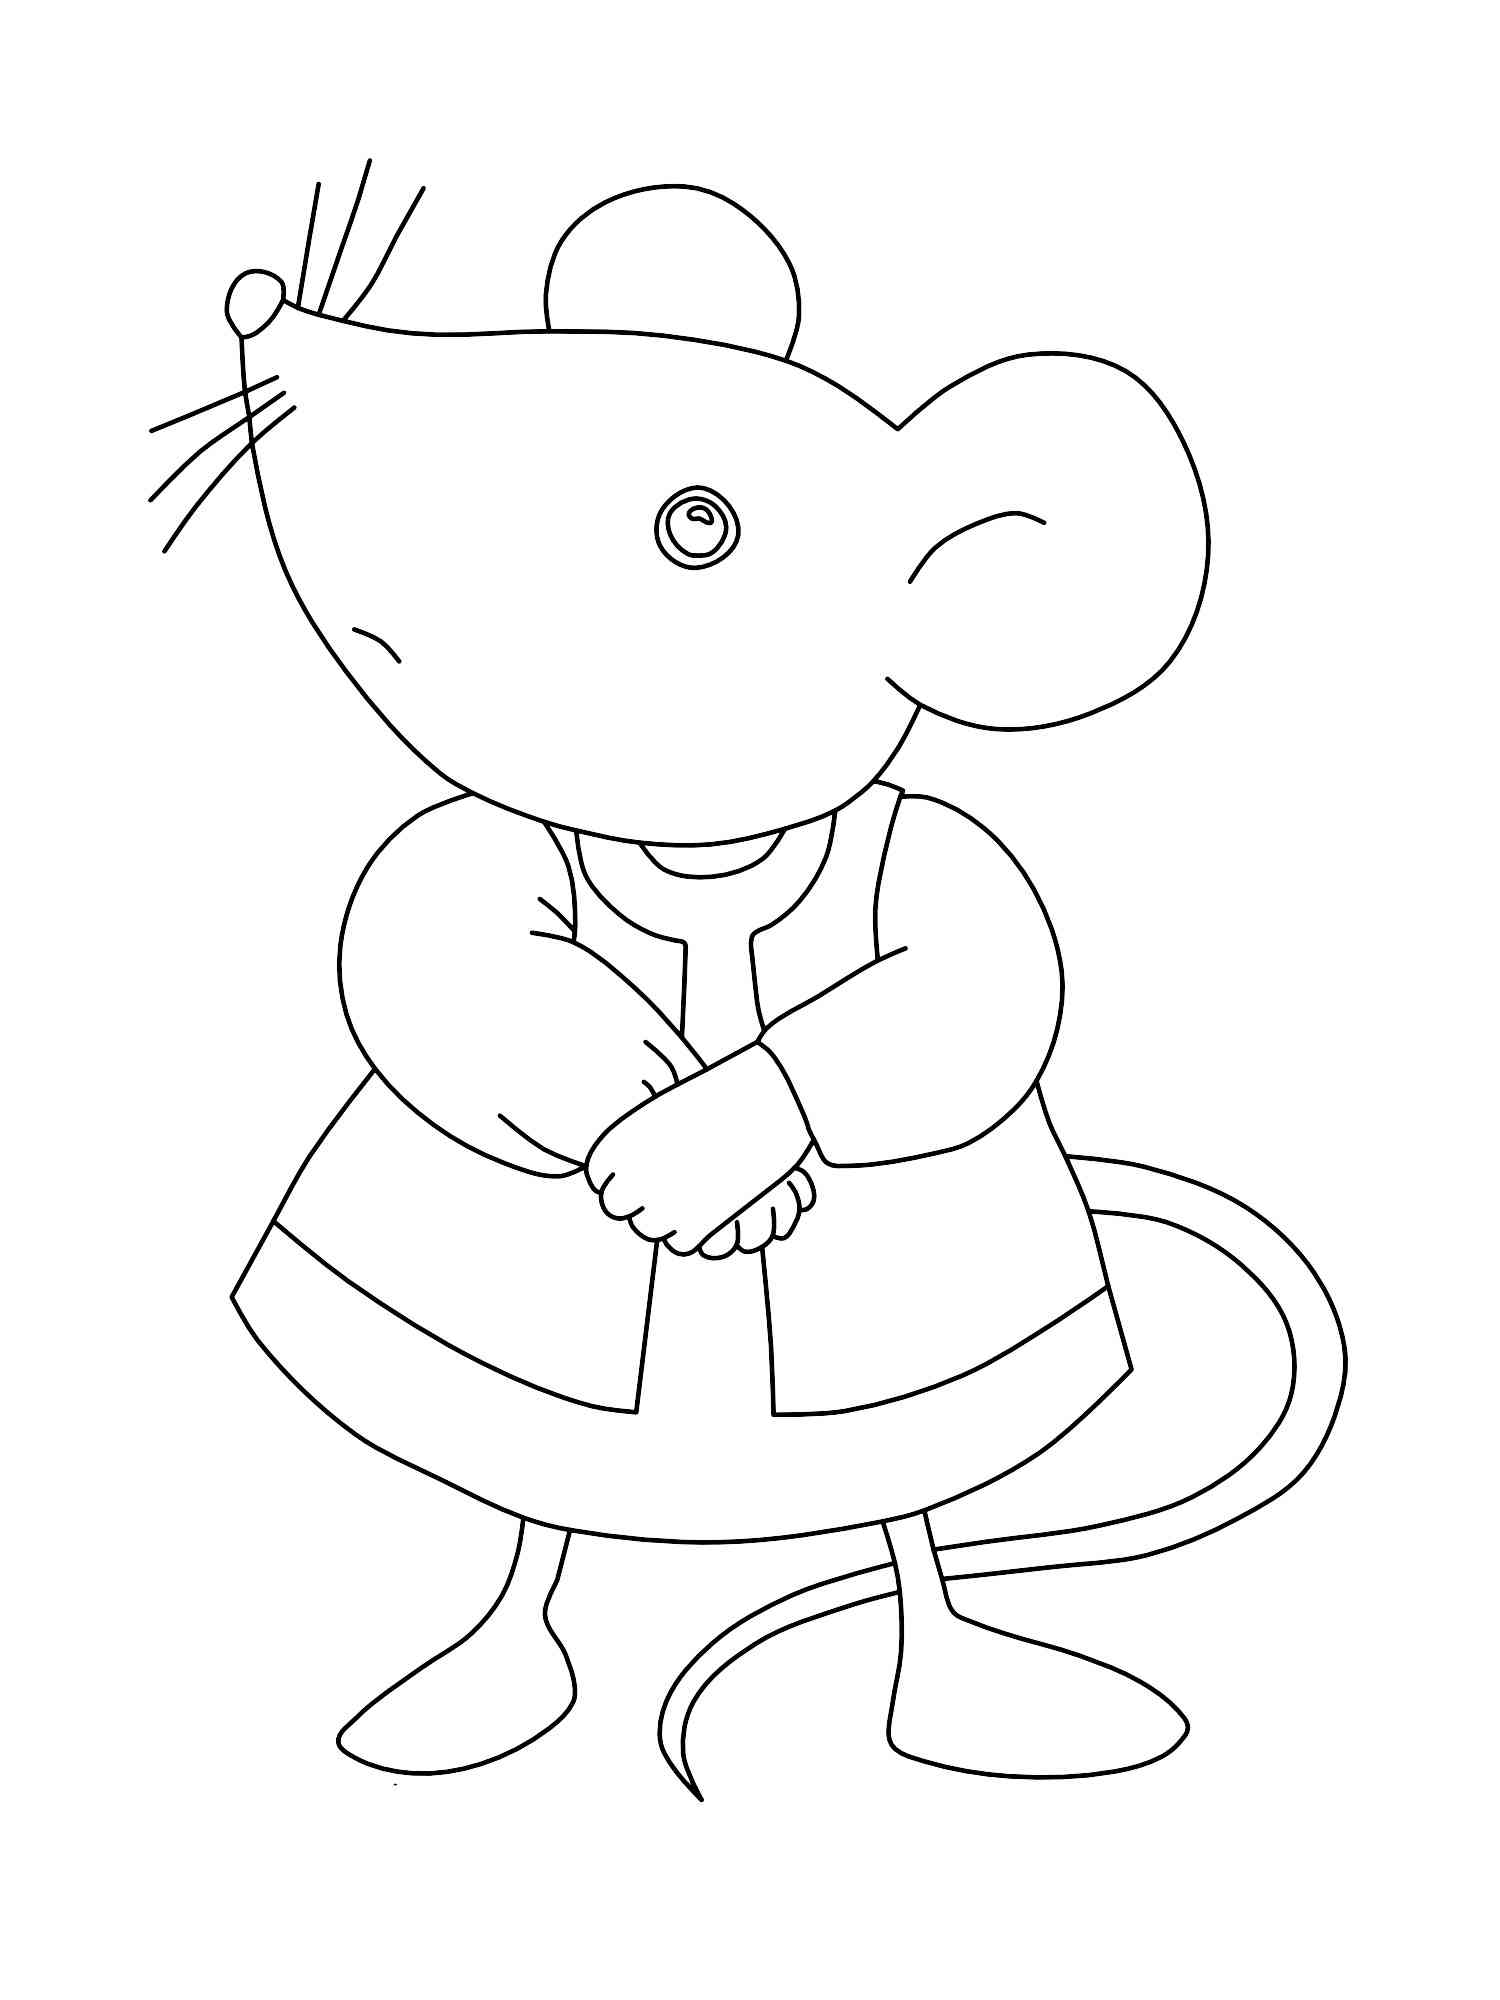 Cartoon Mouse 2 coloring page